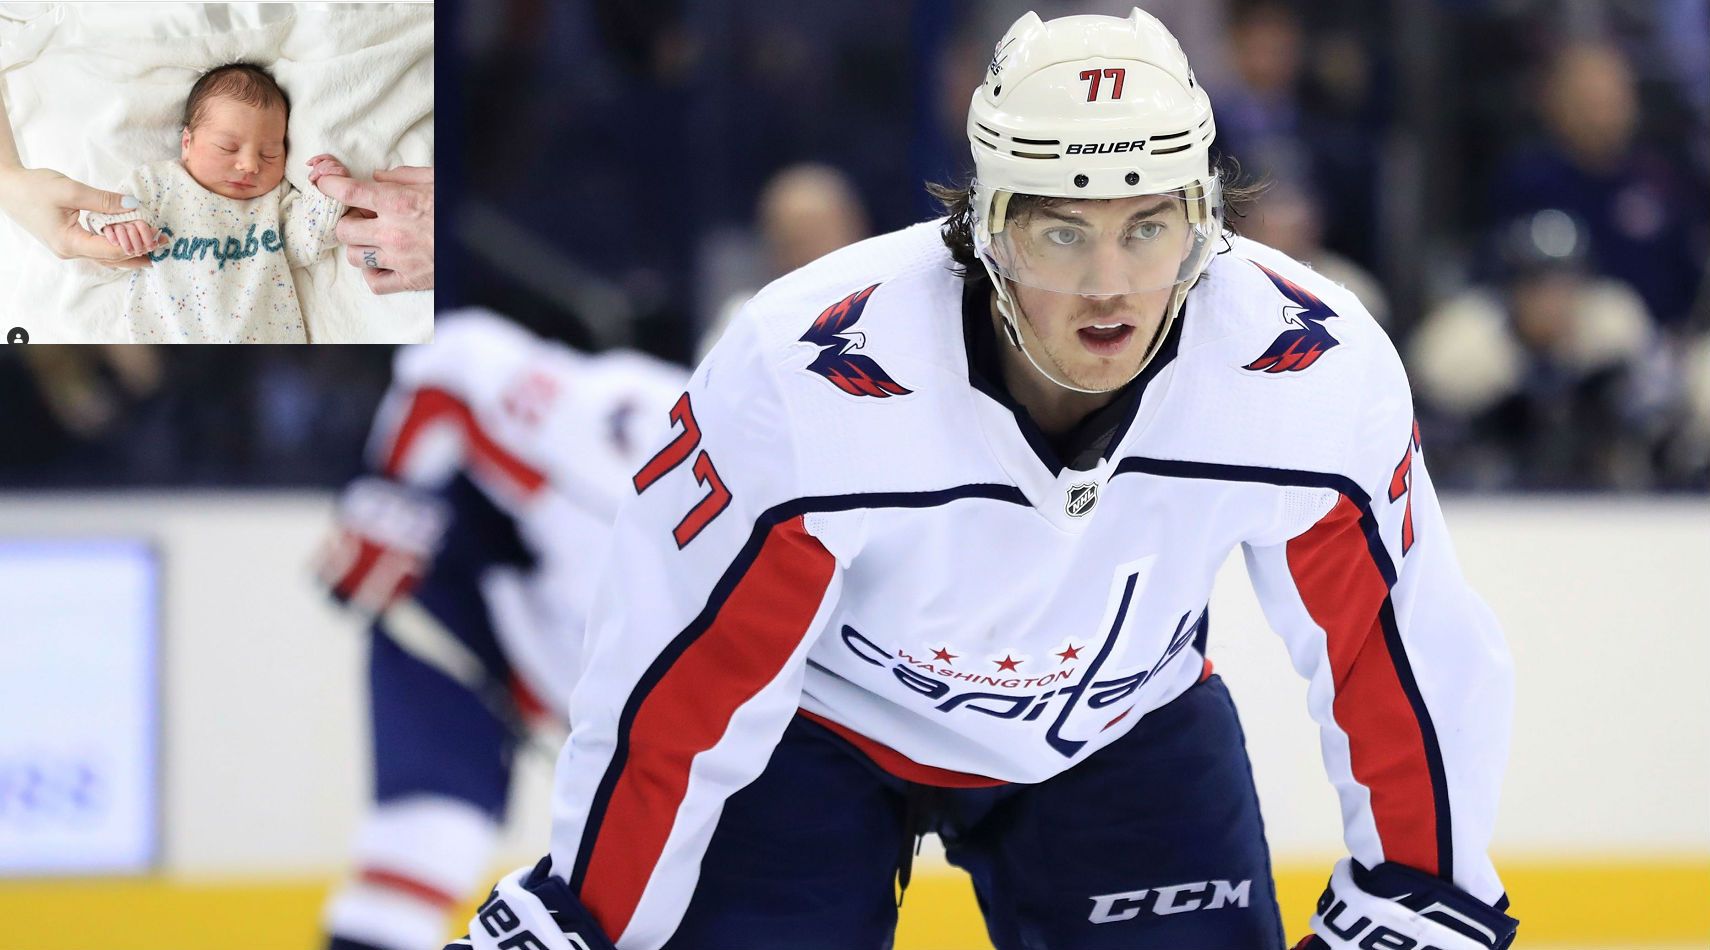 Olympic hockey star TJ Oshie and fiancee give birth to baby girl